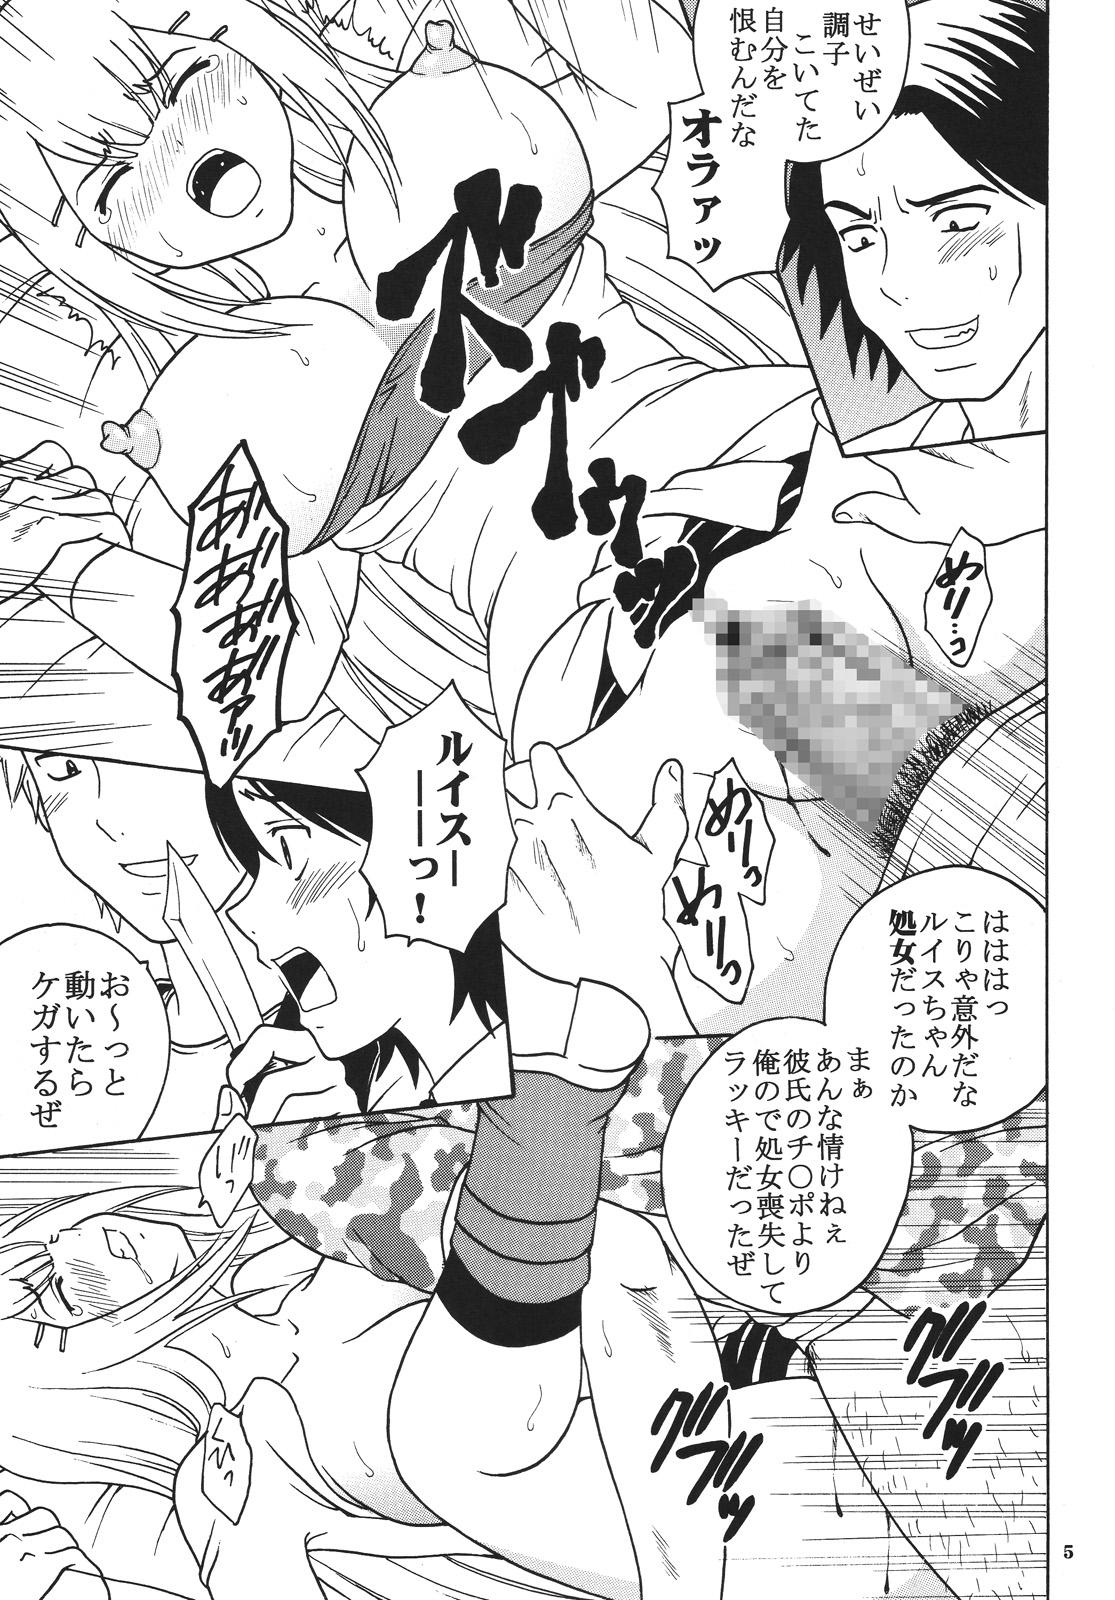 Passion COSMIC BREED 00 - Gundam 00 Jerking Off - Page 6